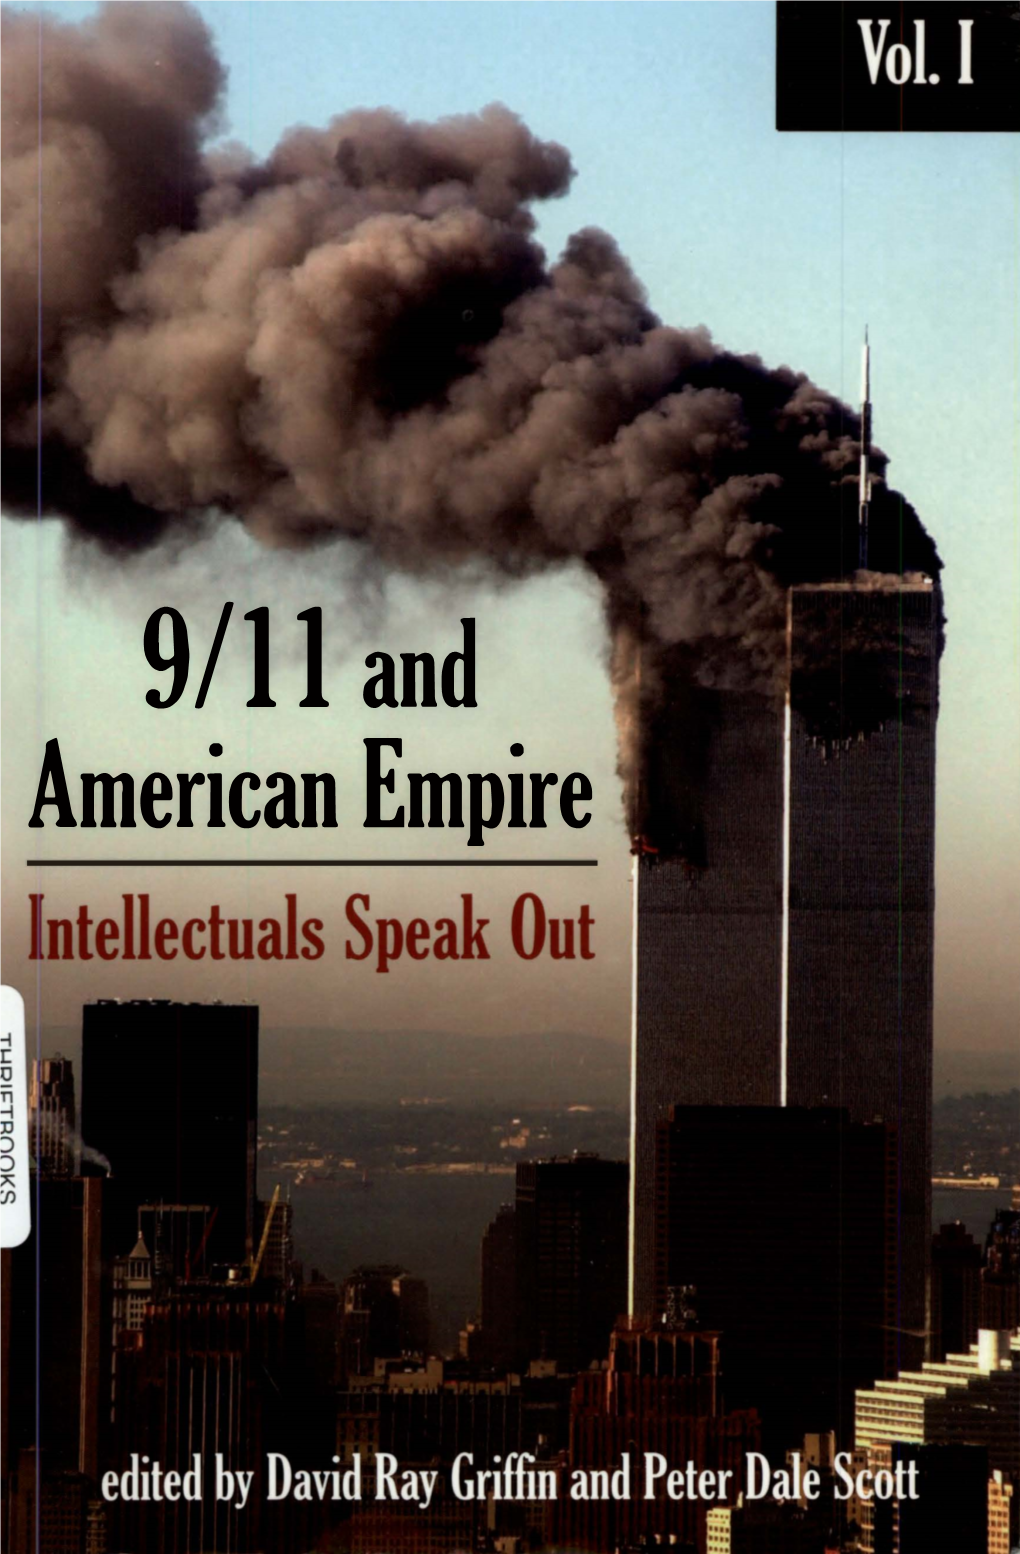 9/11 and American Empire 9/11 and American Empire Intellectuals Speak Out